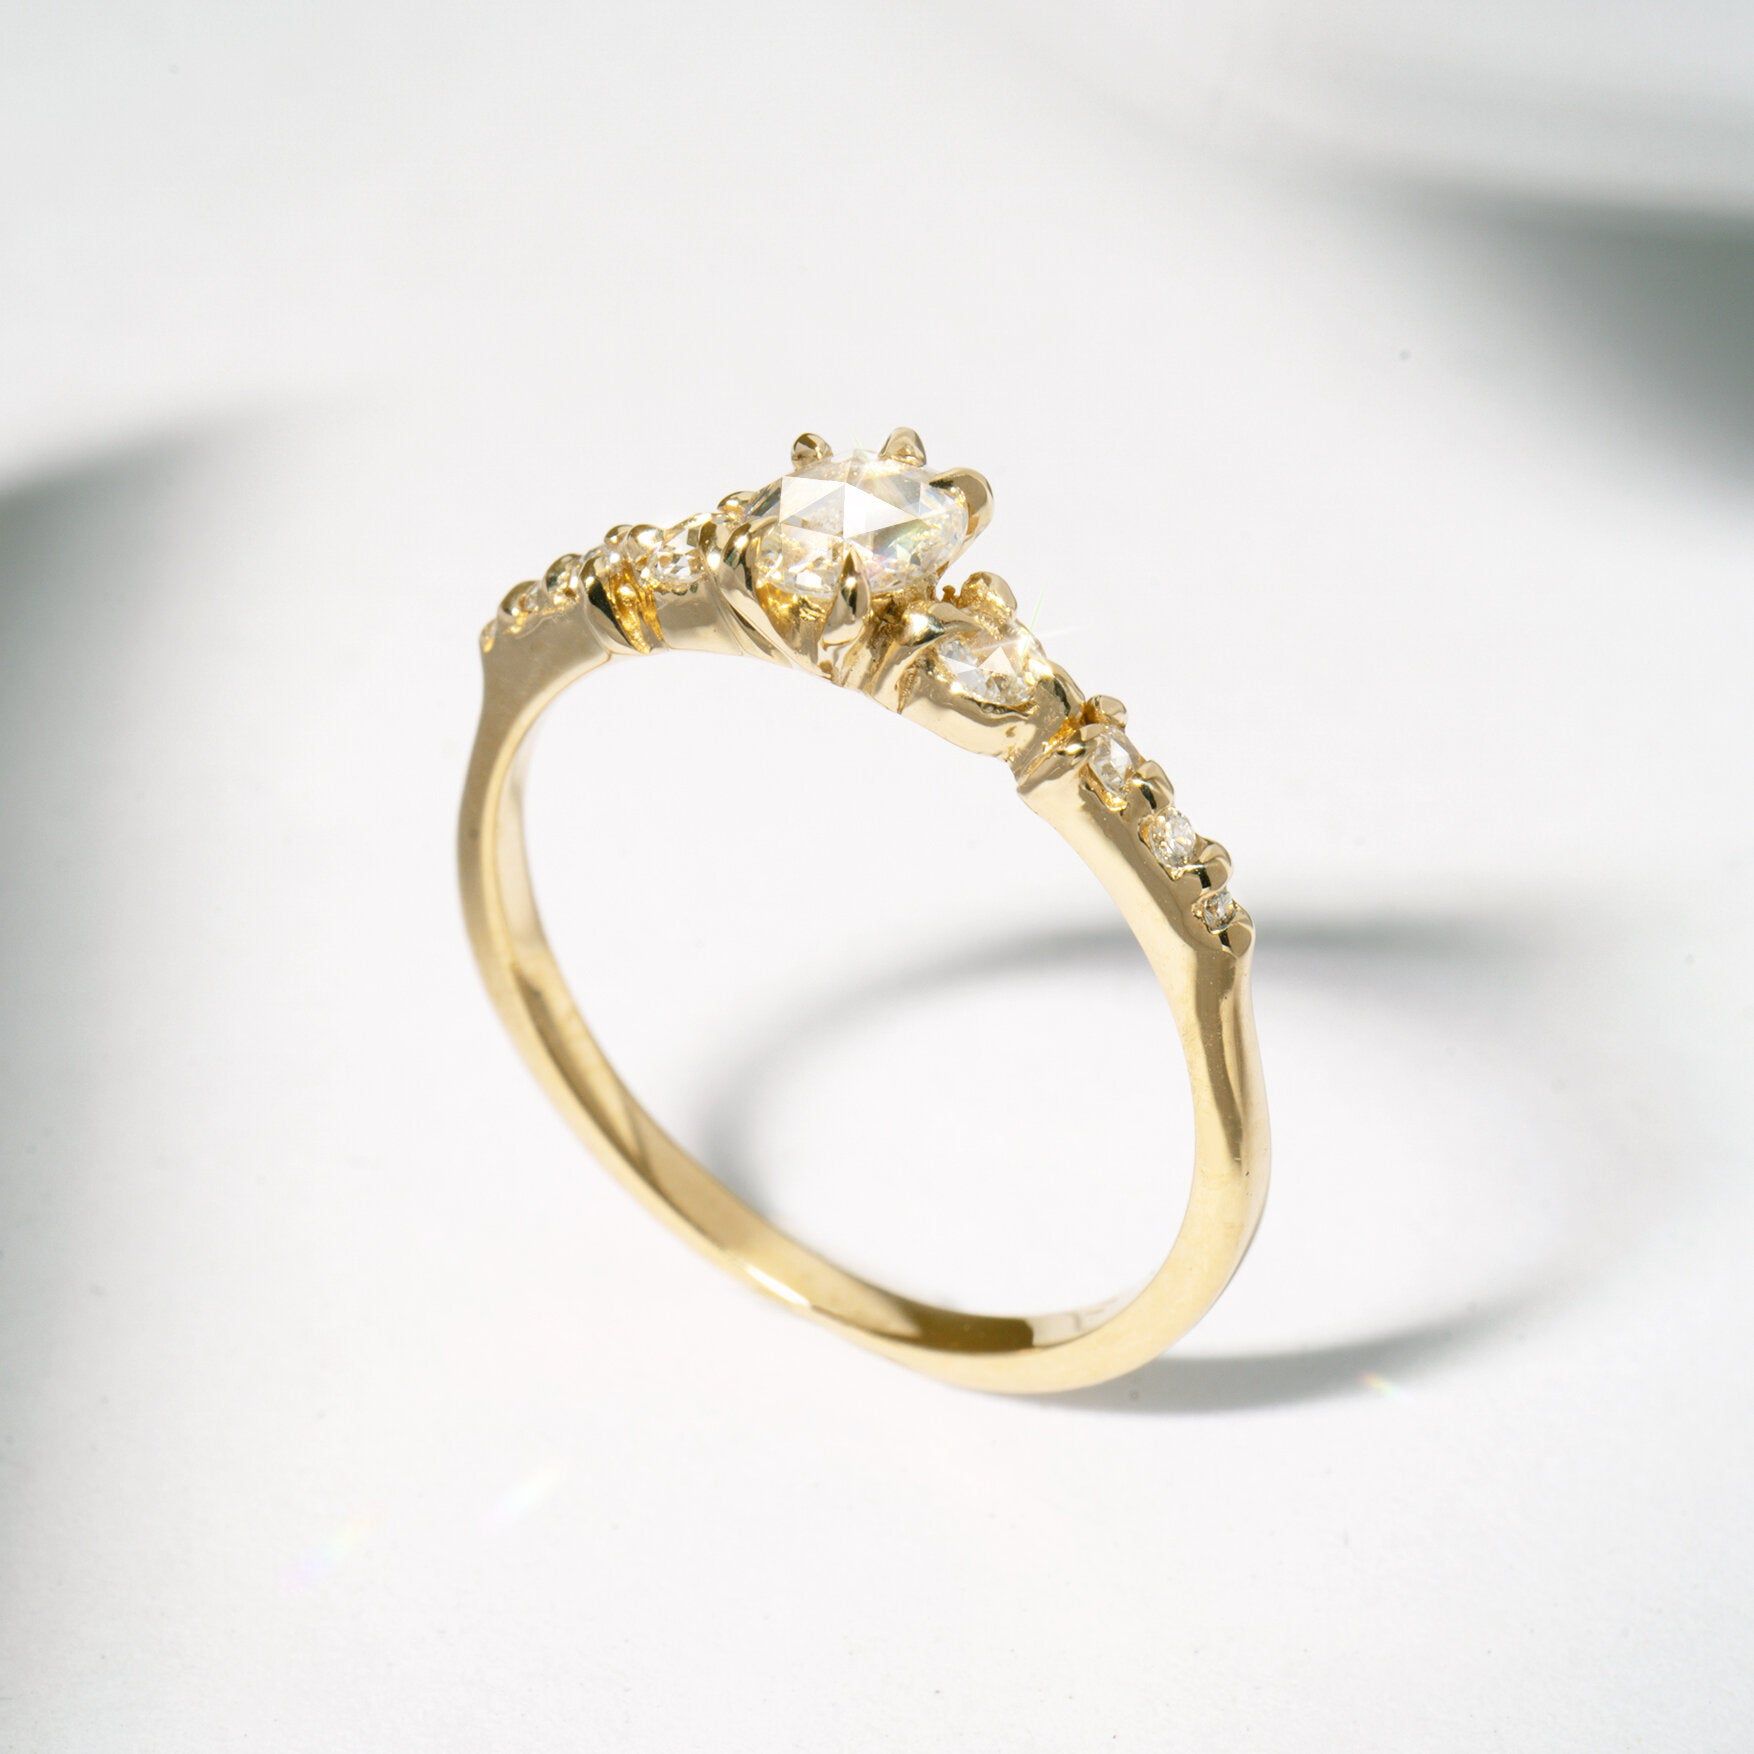 Two souls come together with a gold wedding ring